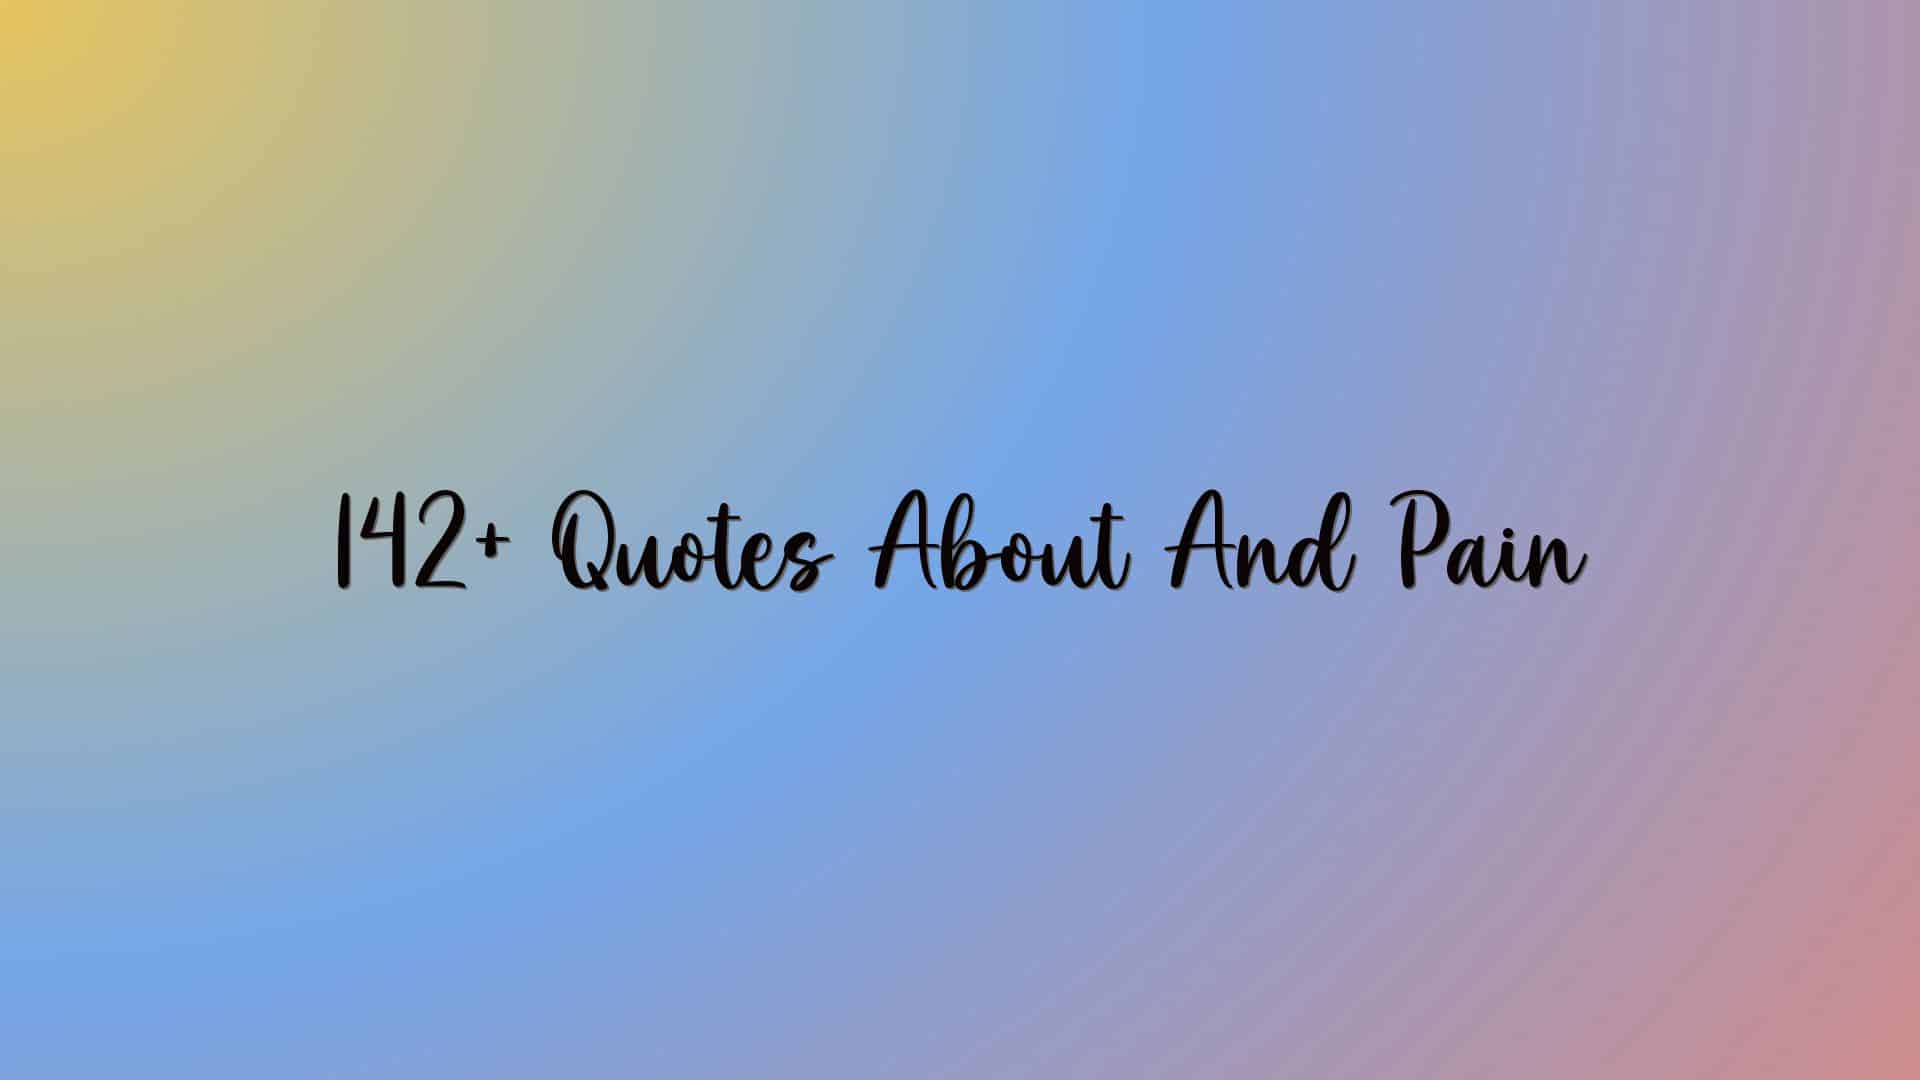 142+ Quotes About And Pain